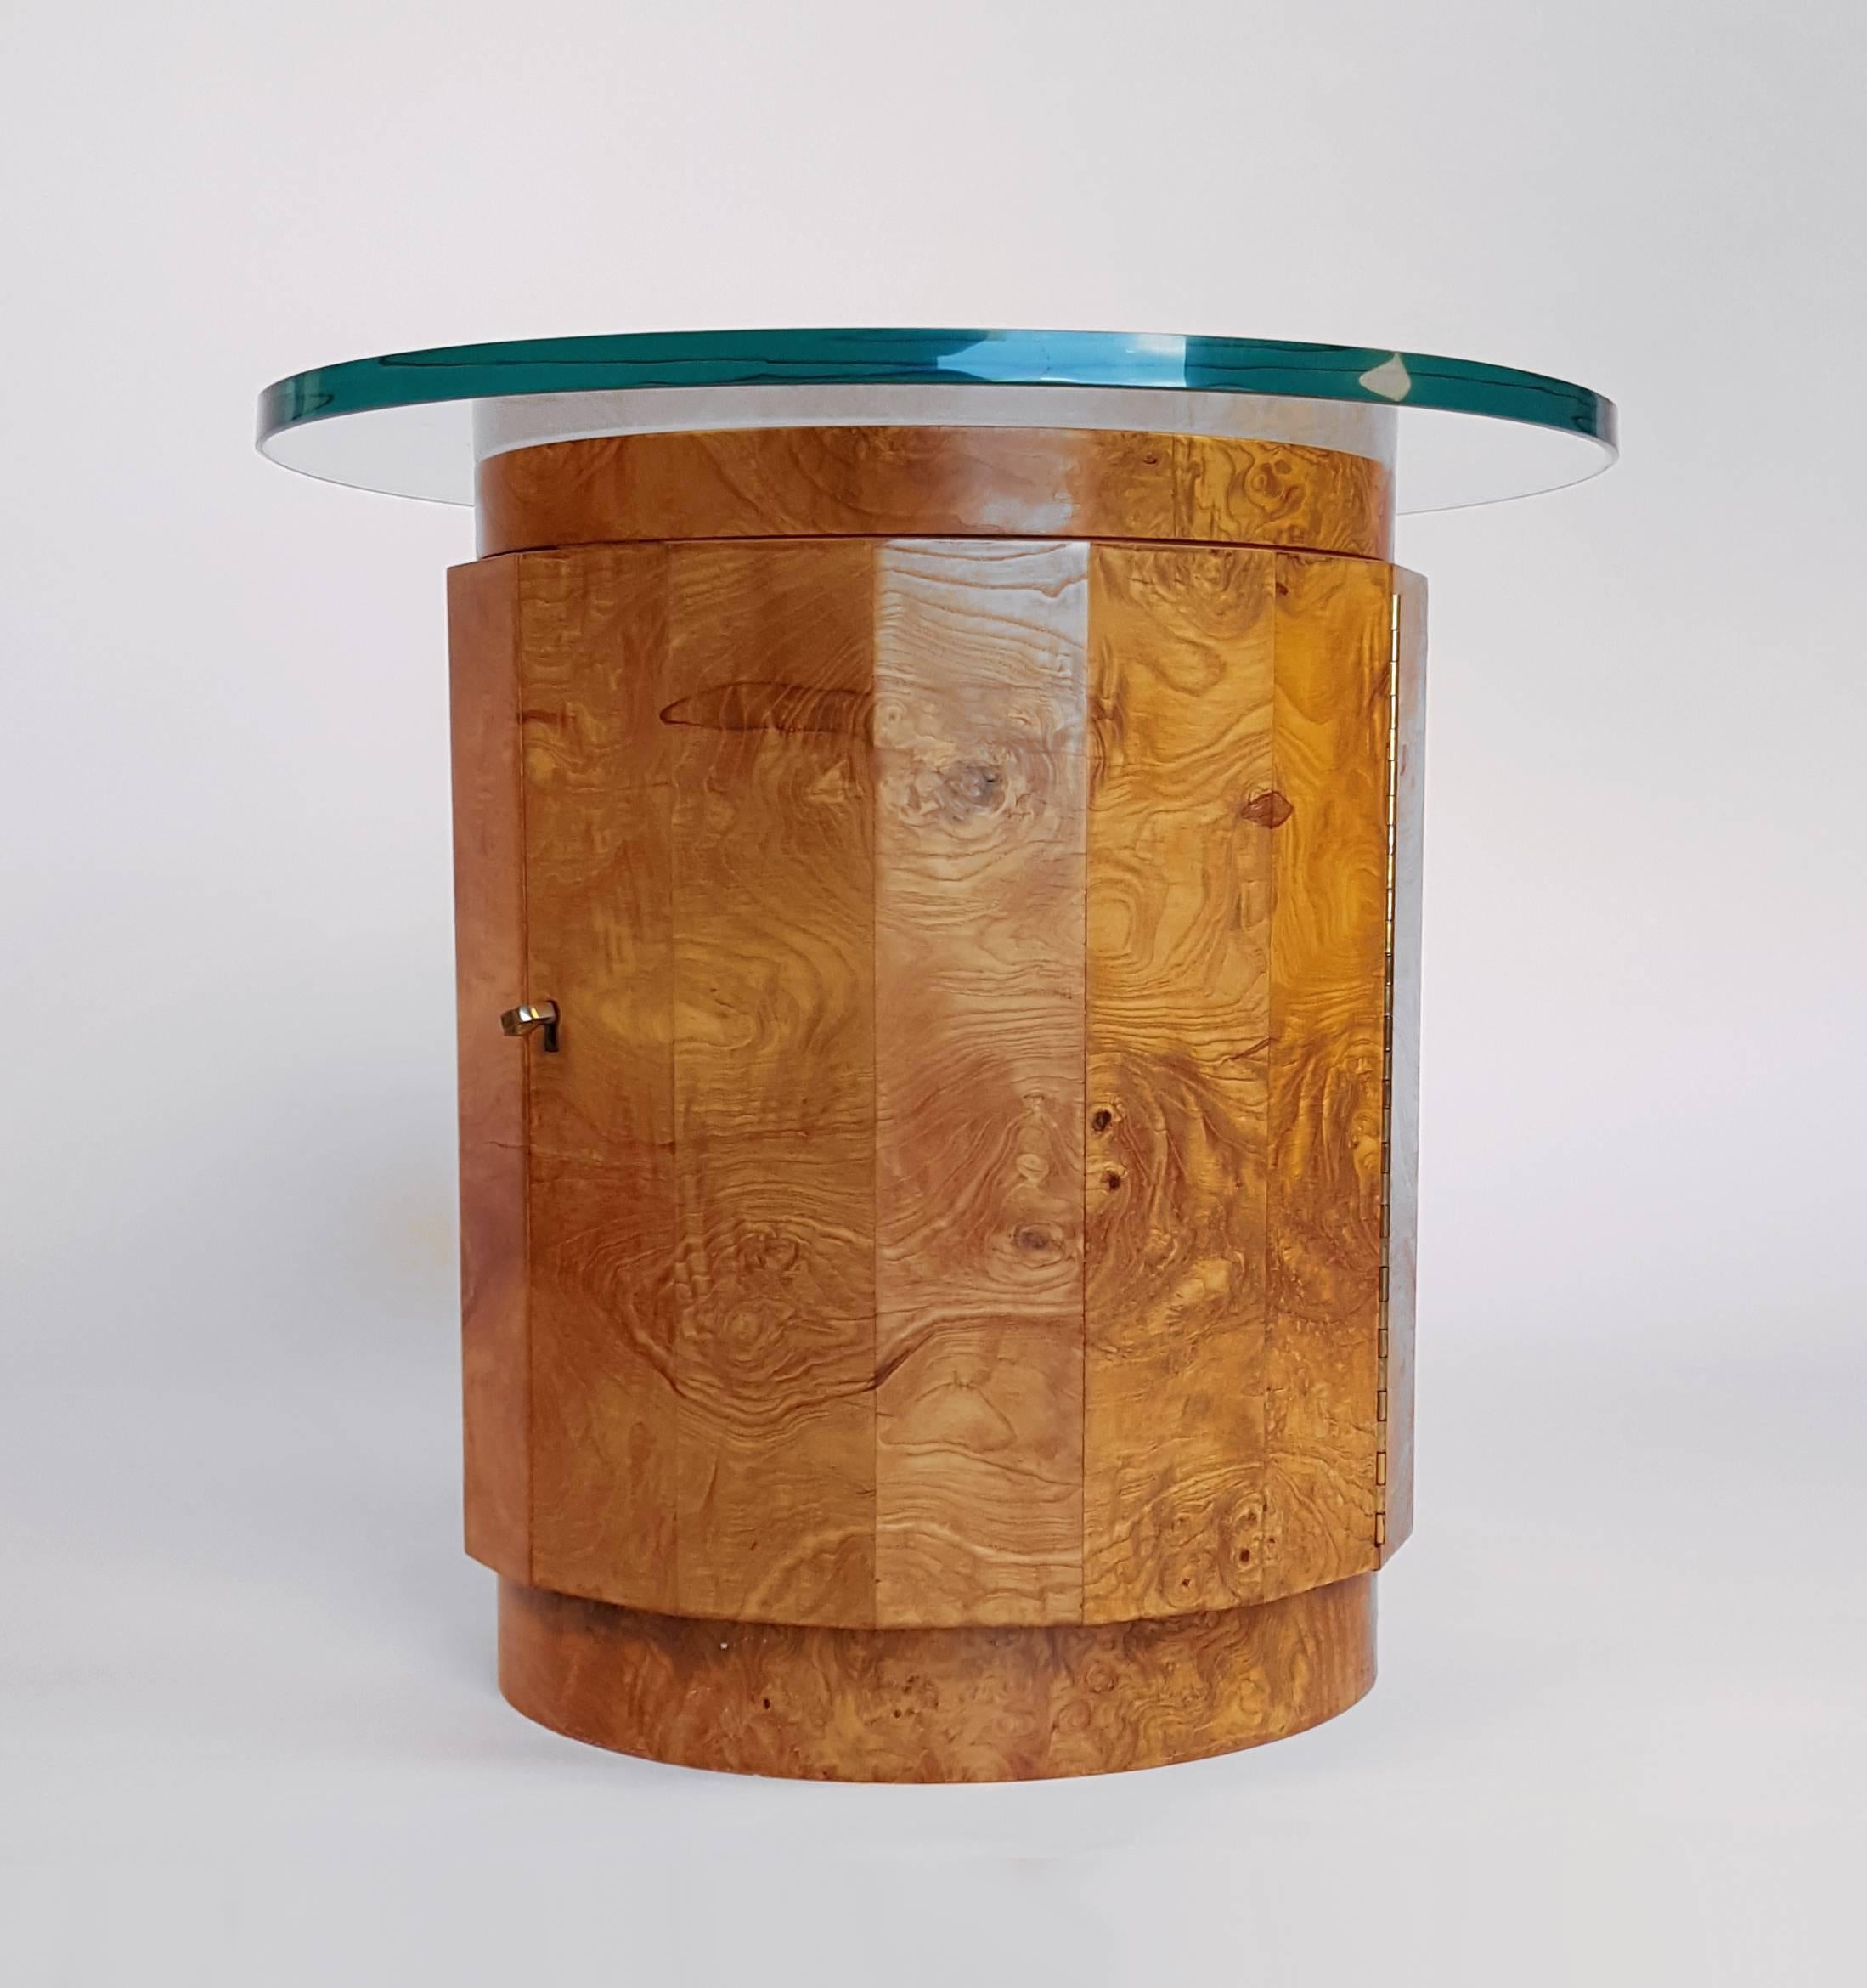 Natural Olive burl wood 16-sided drum table model # 6302D by Edward Wormley for Dunbar. The table includes the original big 